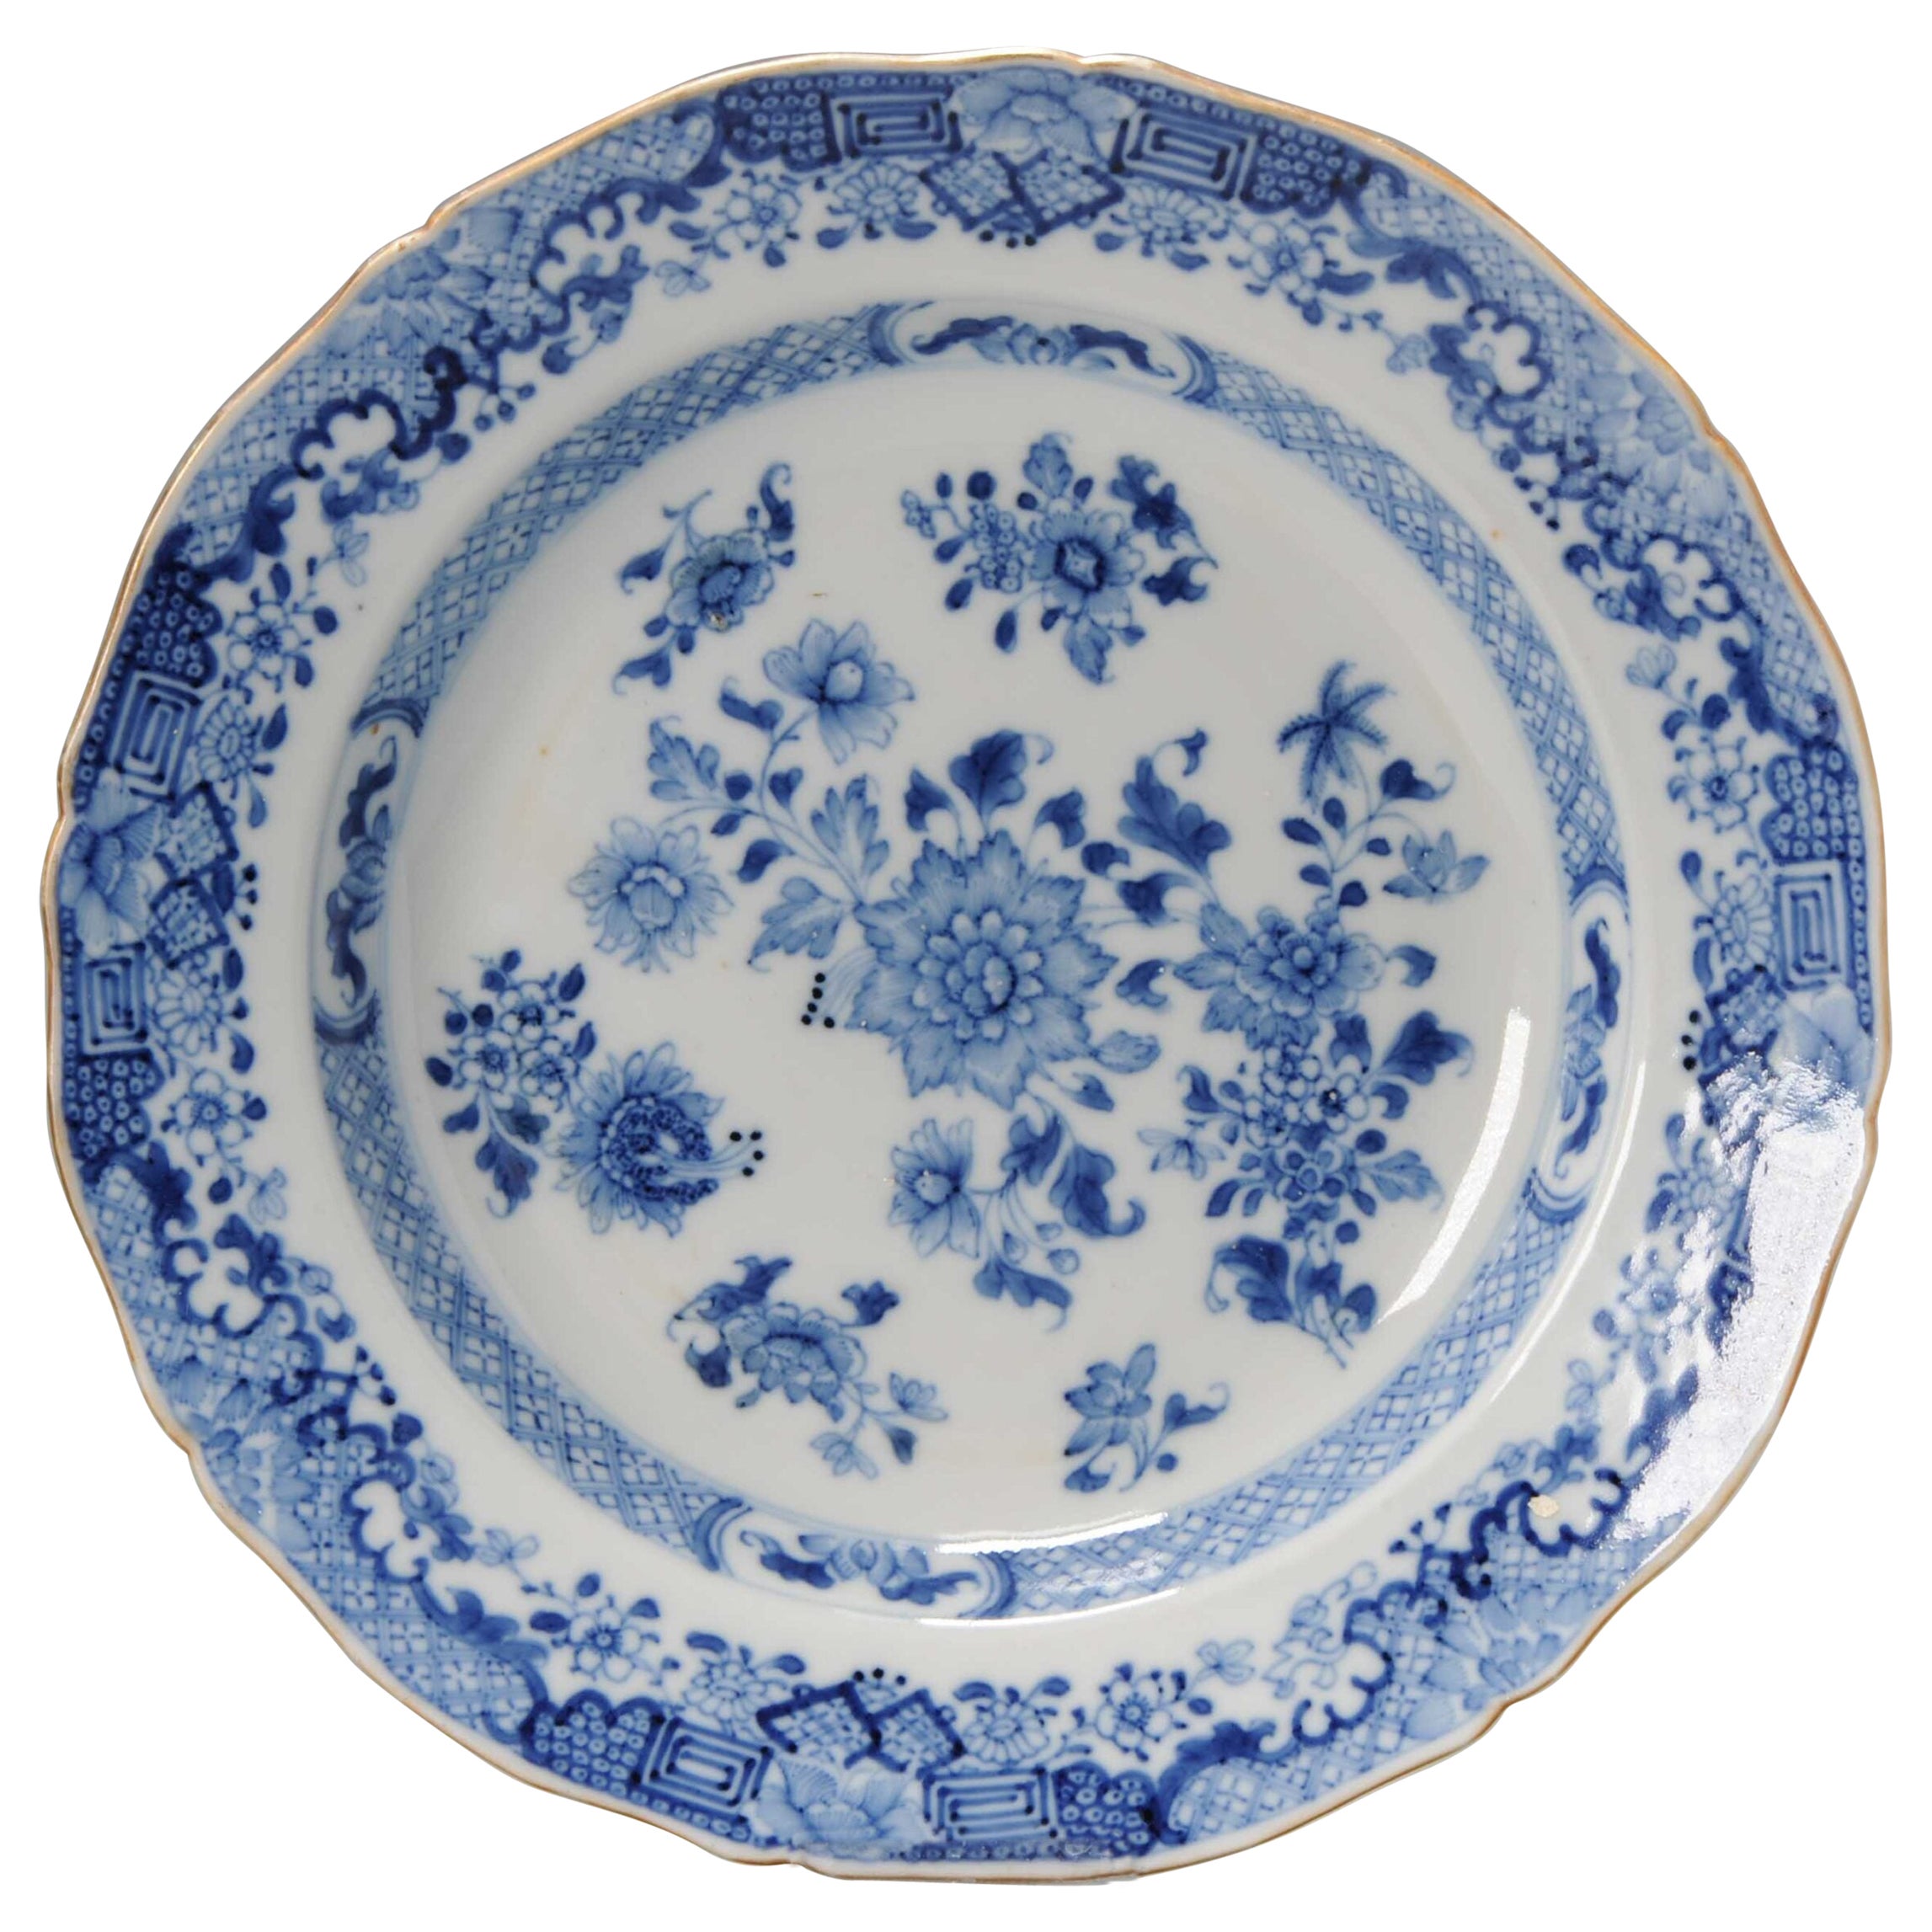 Perfect Antique High Quality Chinese Blue & White Garden Floral Dish, 18th Cen For Sale